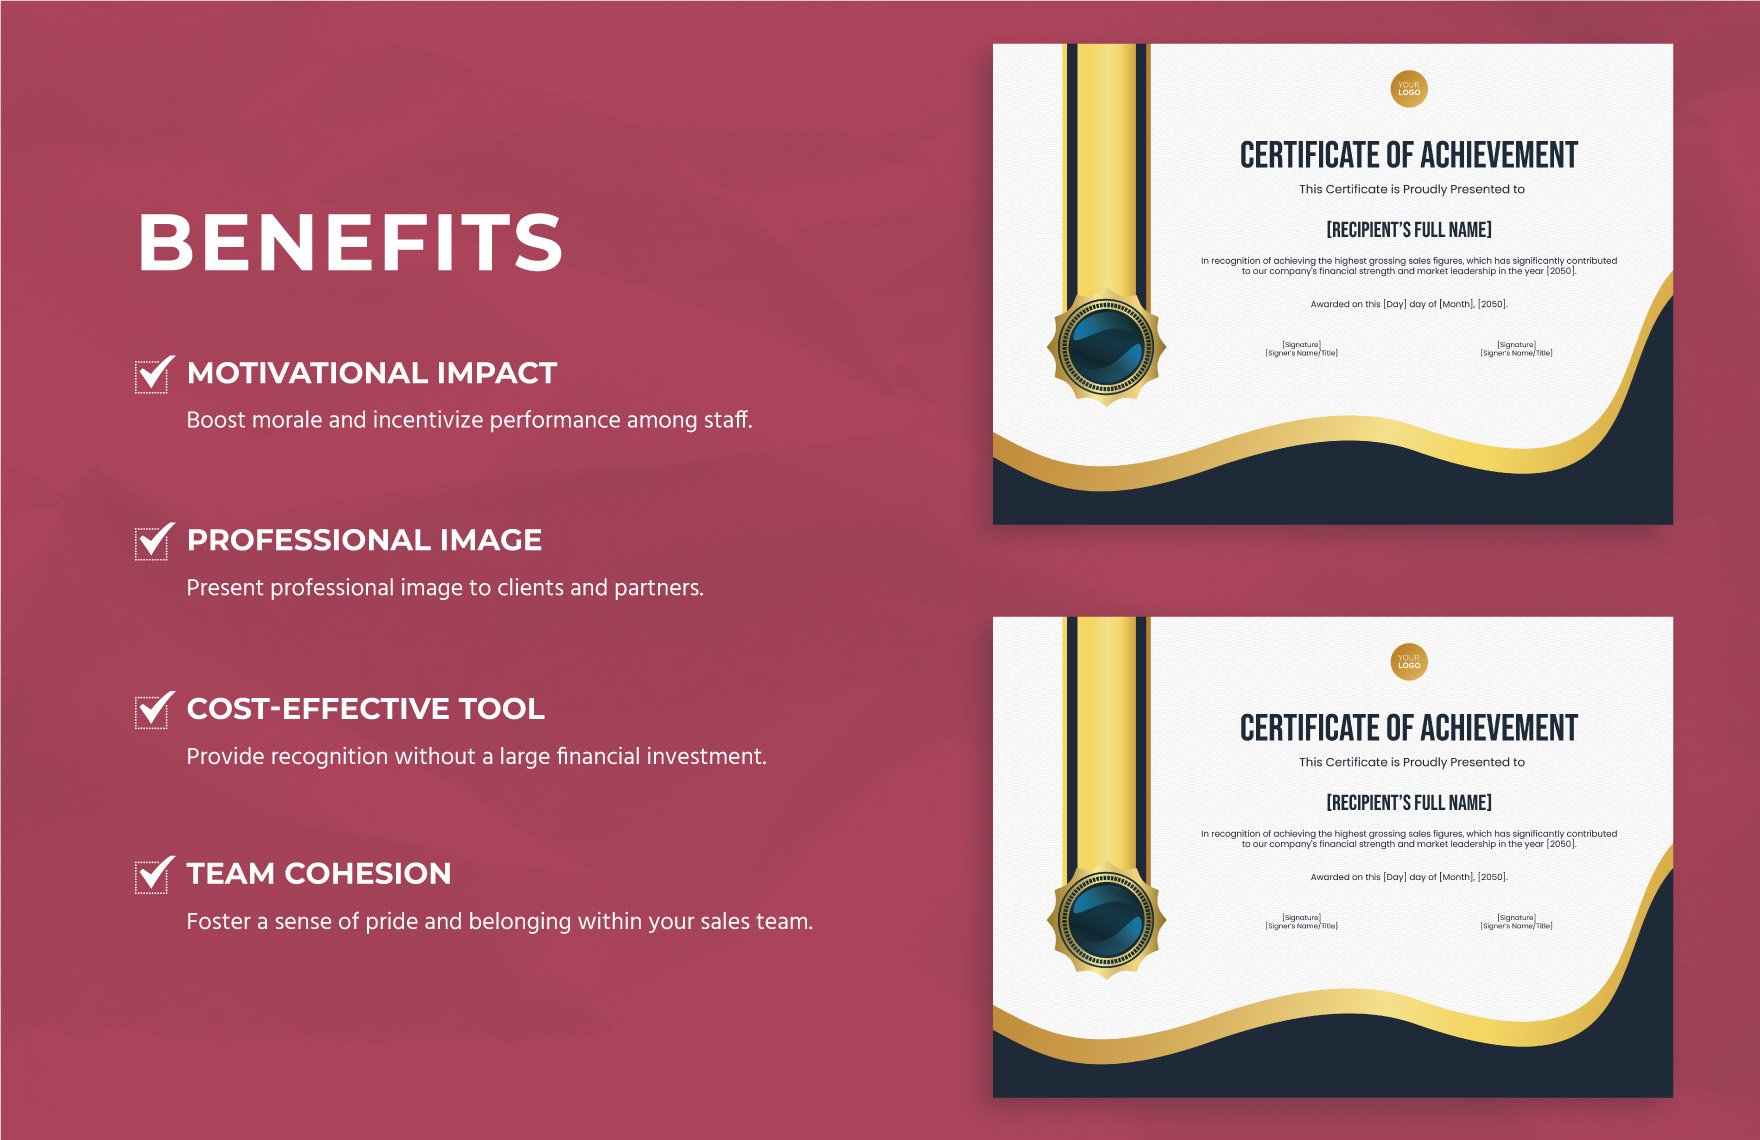 Highest Grossing Sales Certificate Template